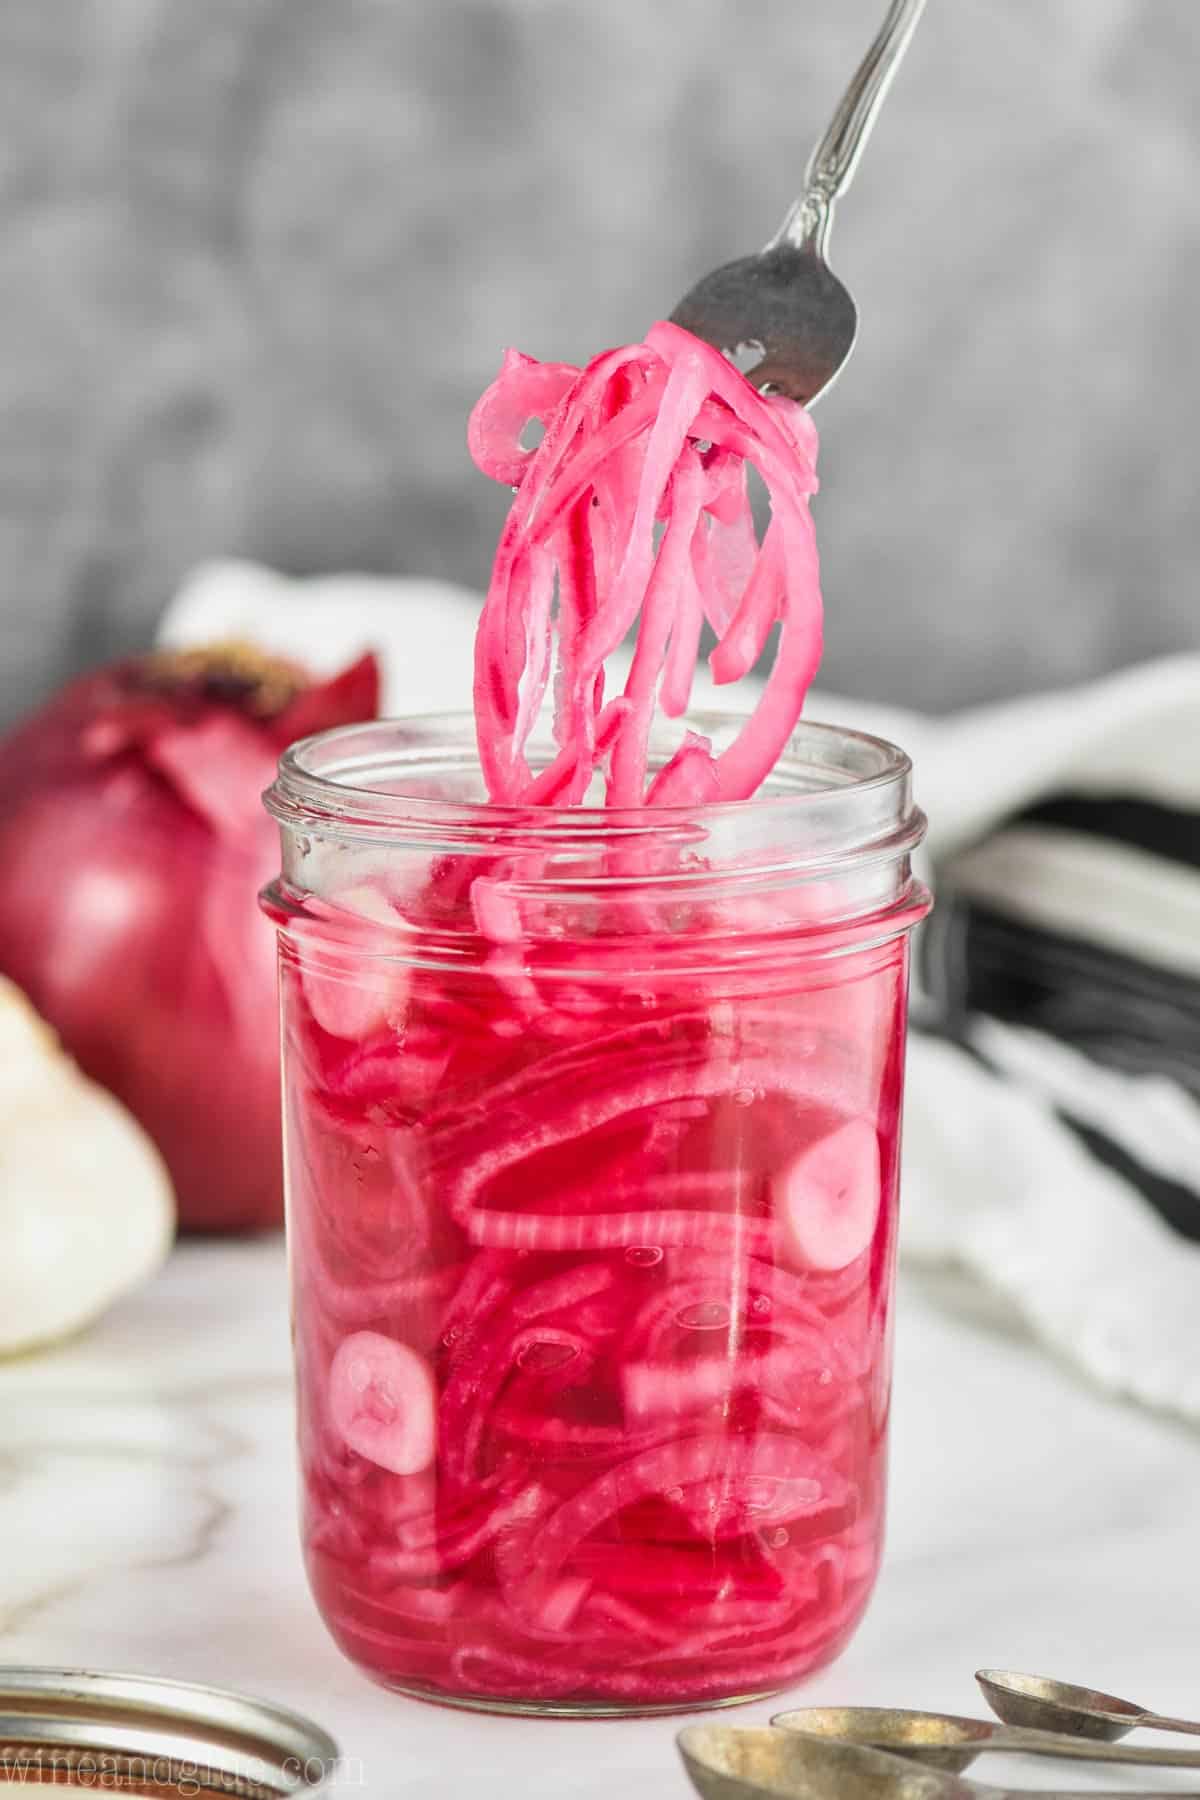 https://www.simplejoy.com/wp-content/uploads/2019/01/quick_pickled_red_onions.jpg